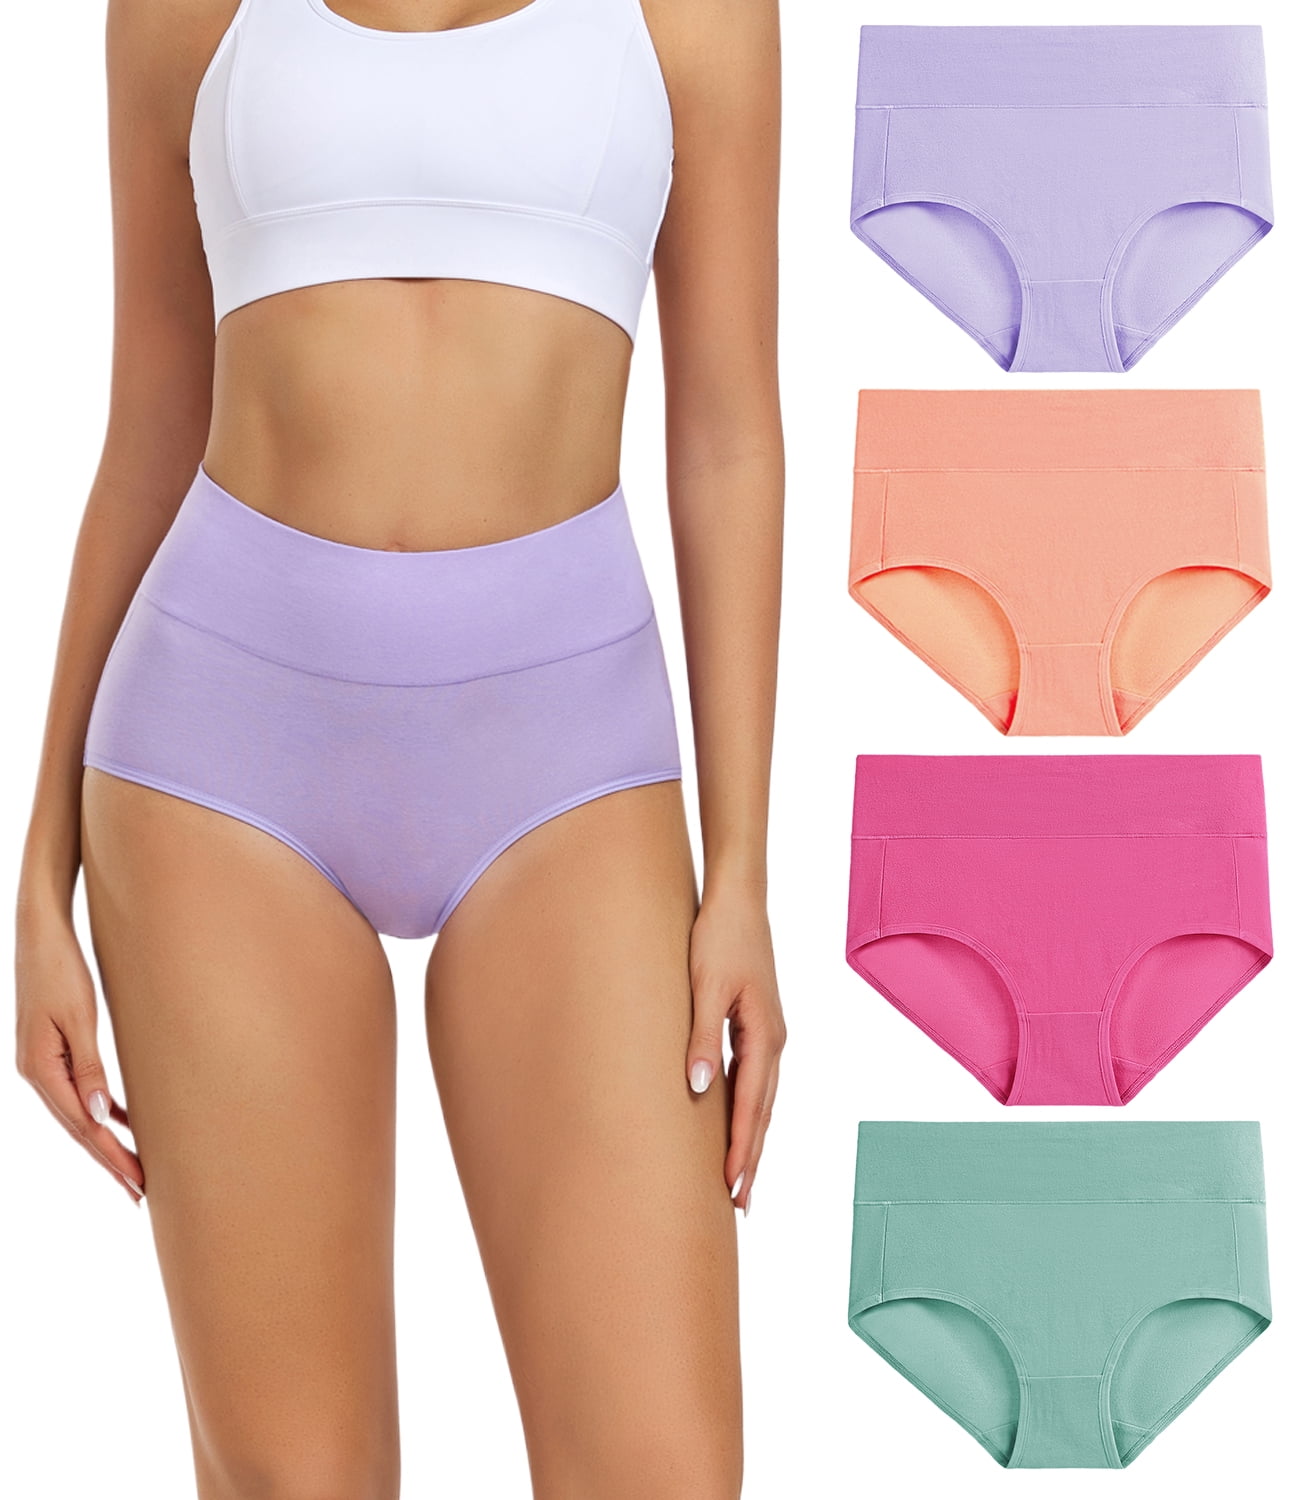 Wirarpa Women's Underwear High Waisted Full Coverage Cotton Briefs 4  Pack(L, Soothing Sea/Orange/Slate Rose/Lilac) 